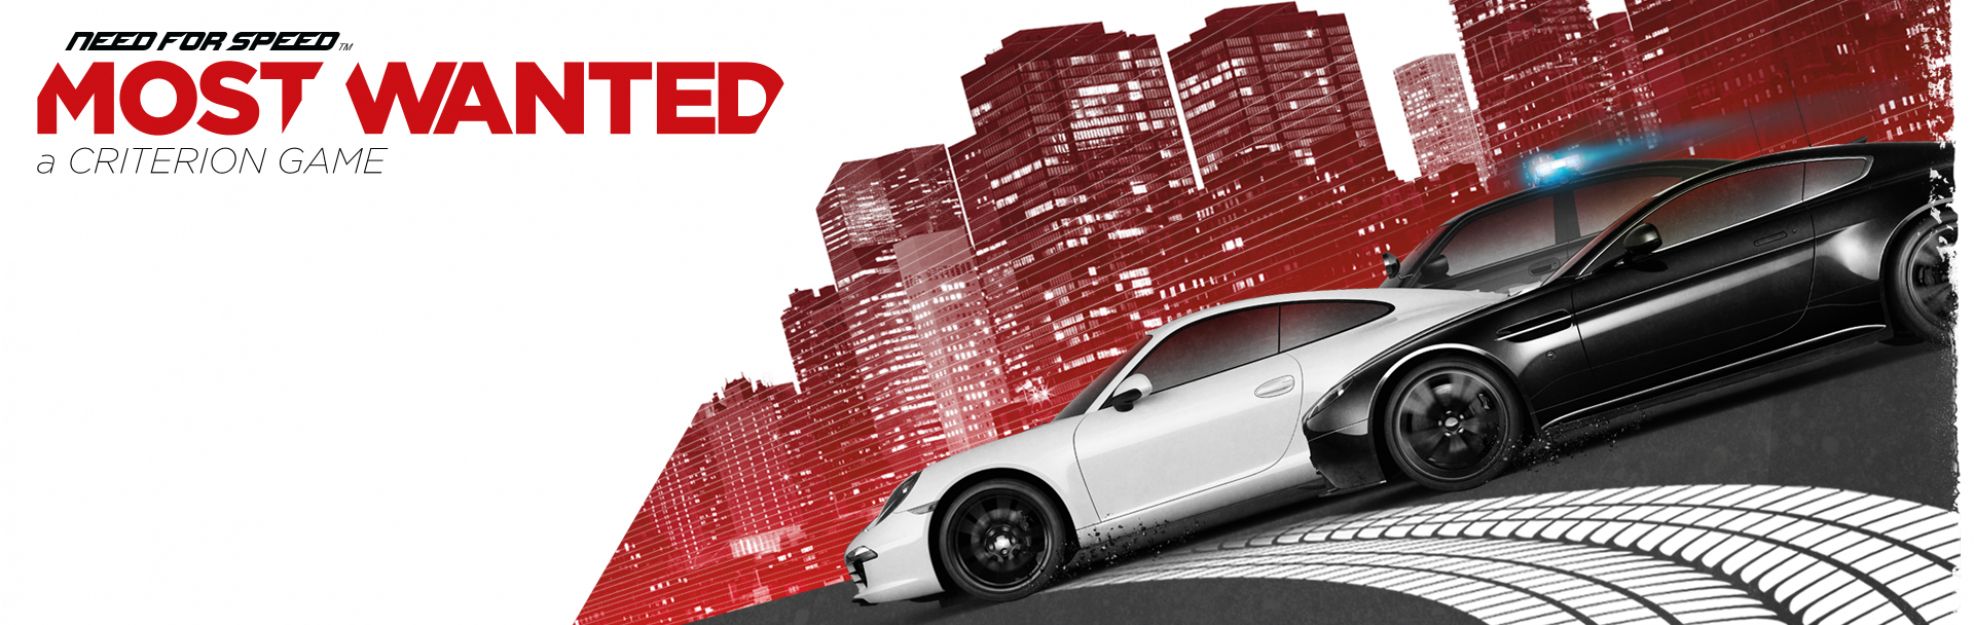 Need For Speed: Most Wanted 2012 + почта [ORIGIN]